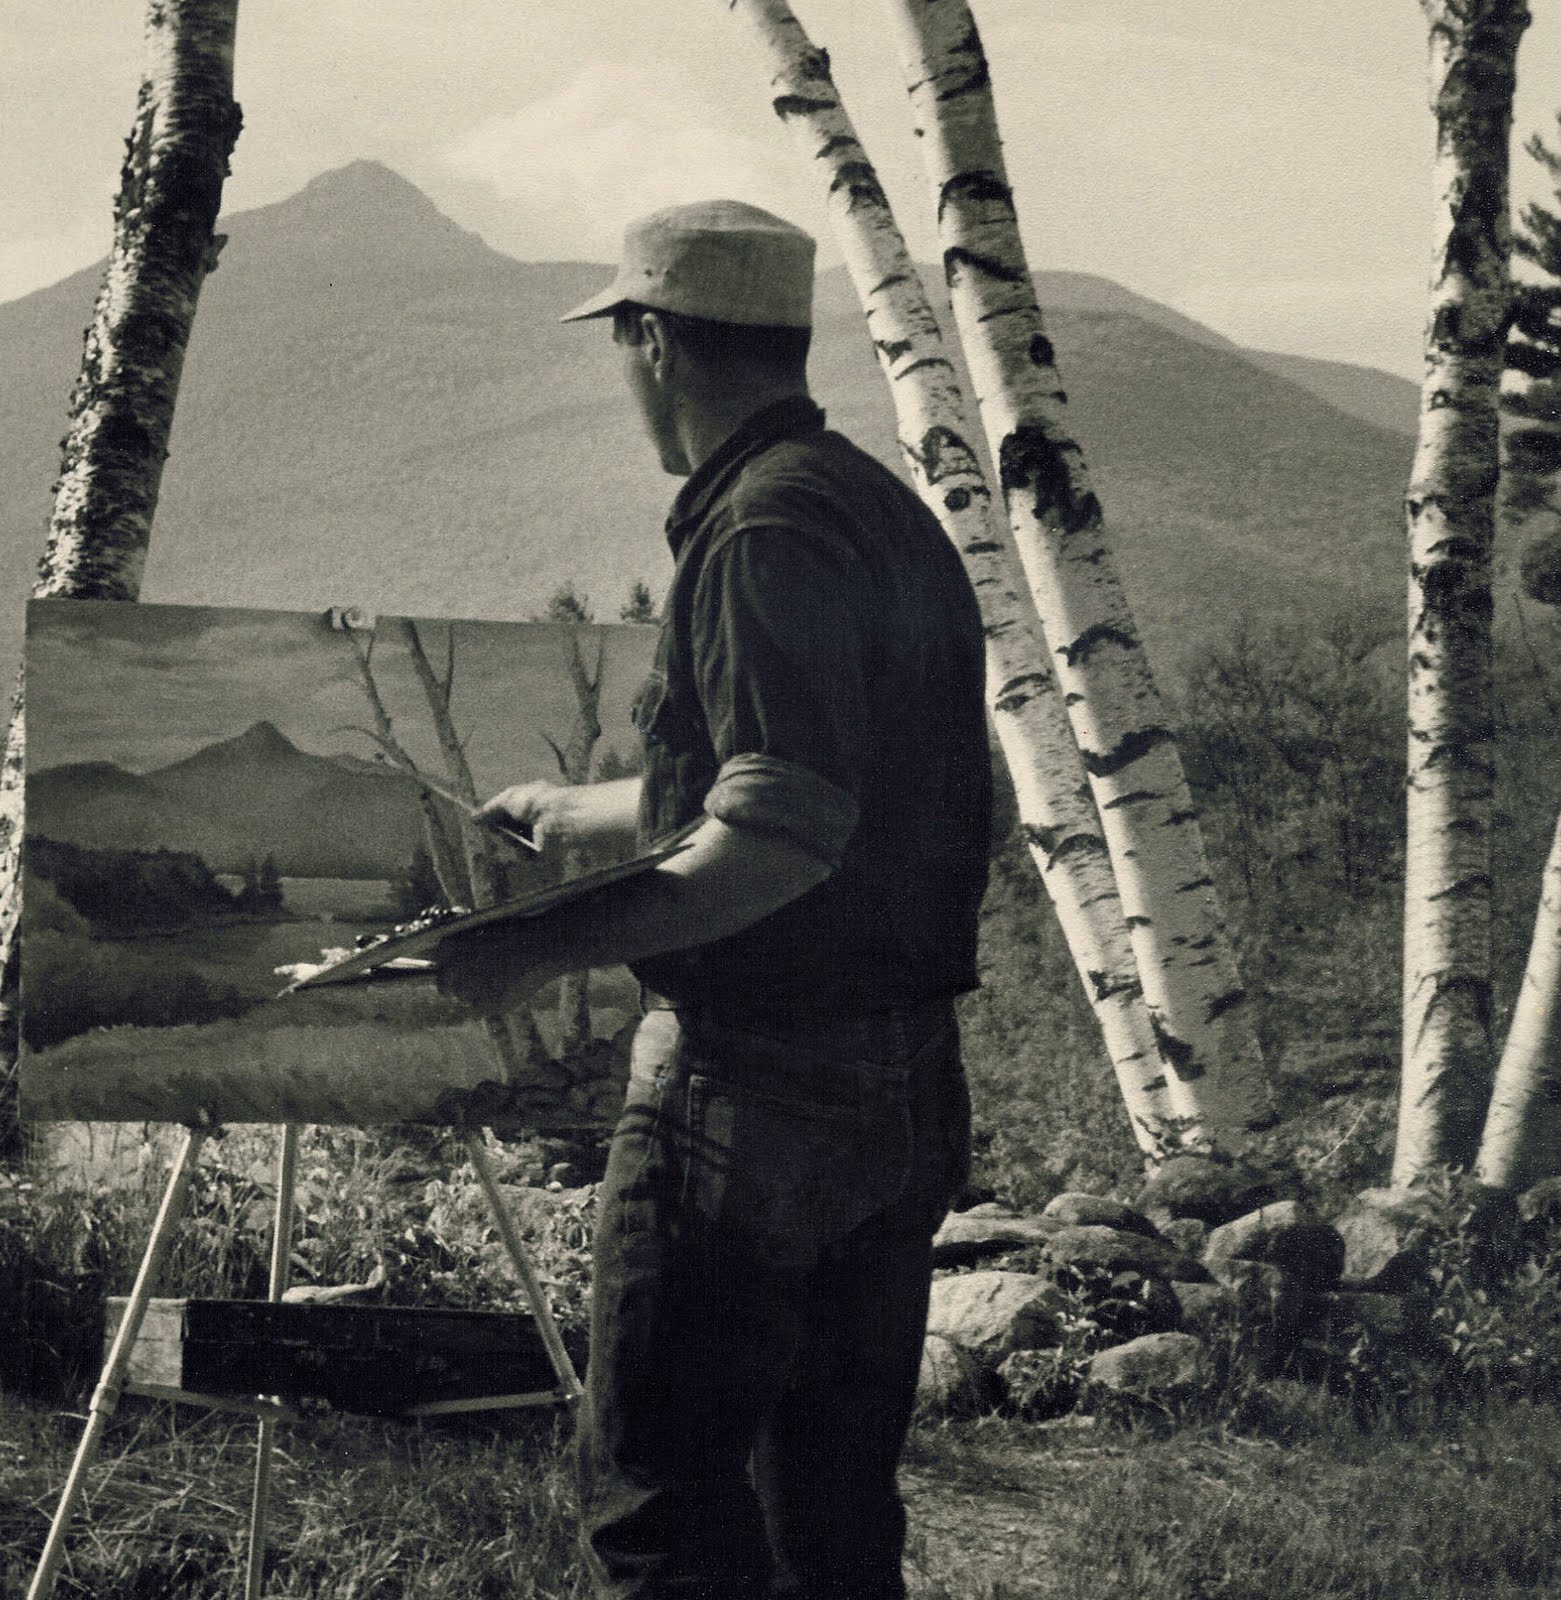 Dick Packer painting at the Basin View Lot, 1950